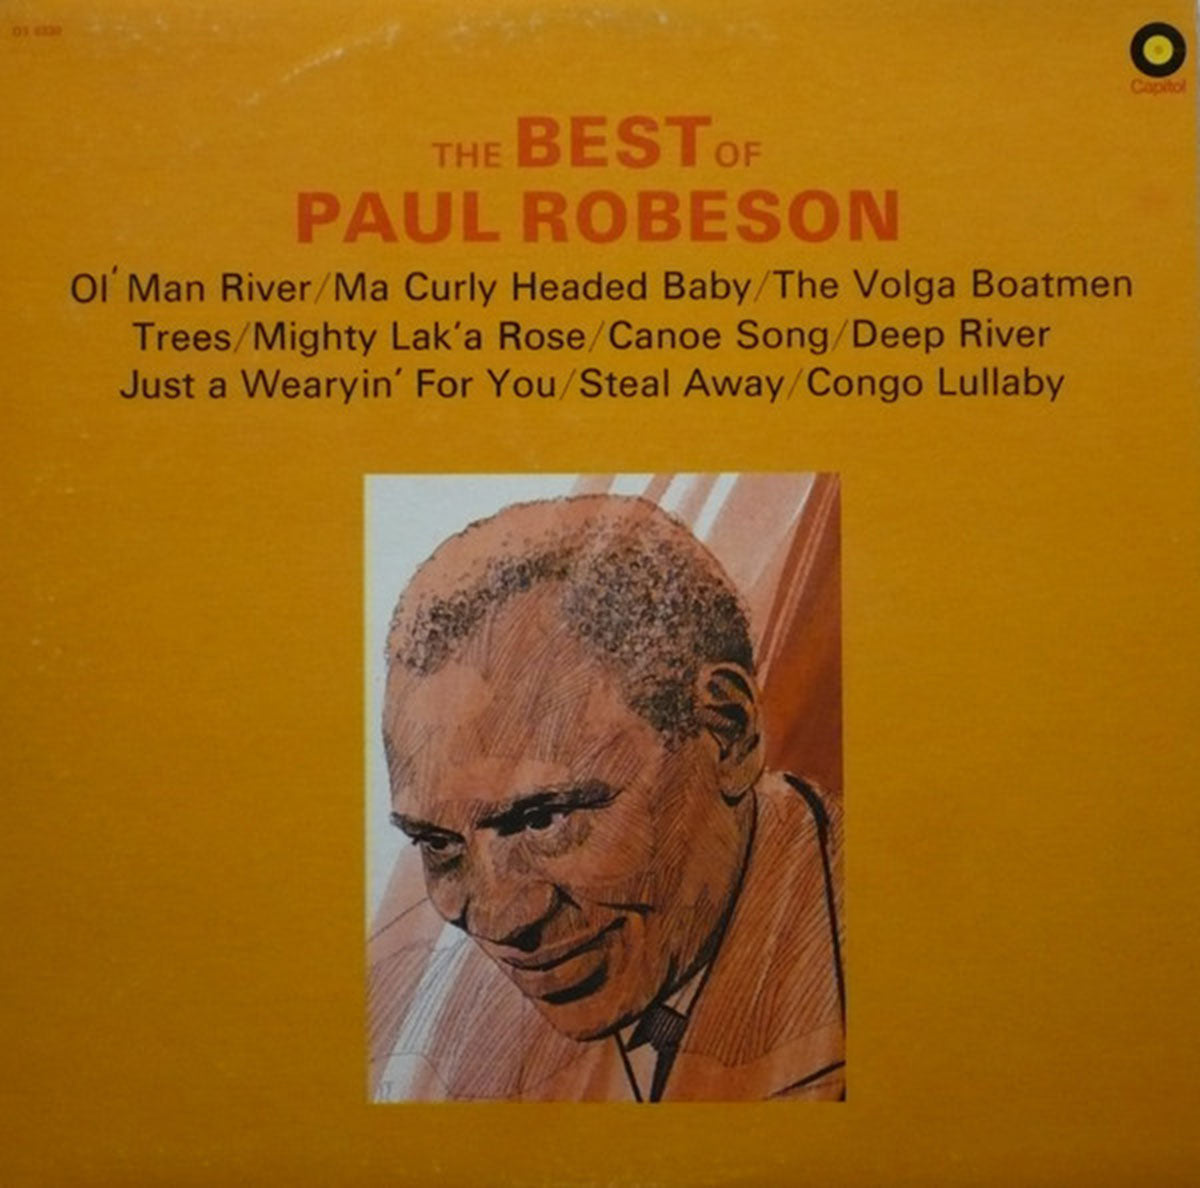 Paul Robeson – The Best Of Paul Robeson